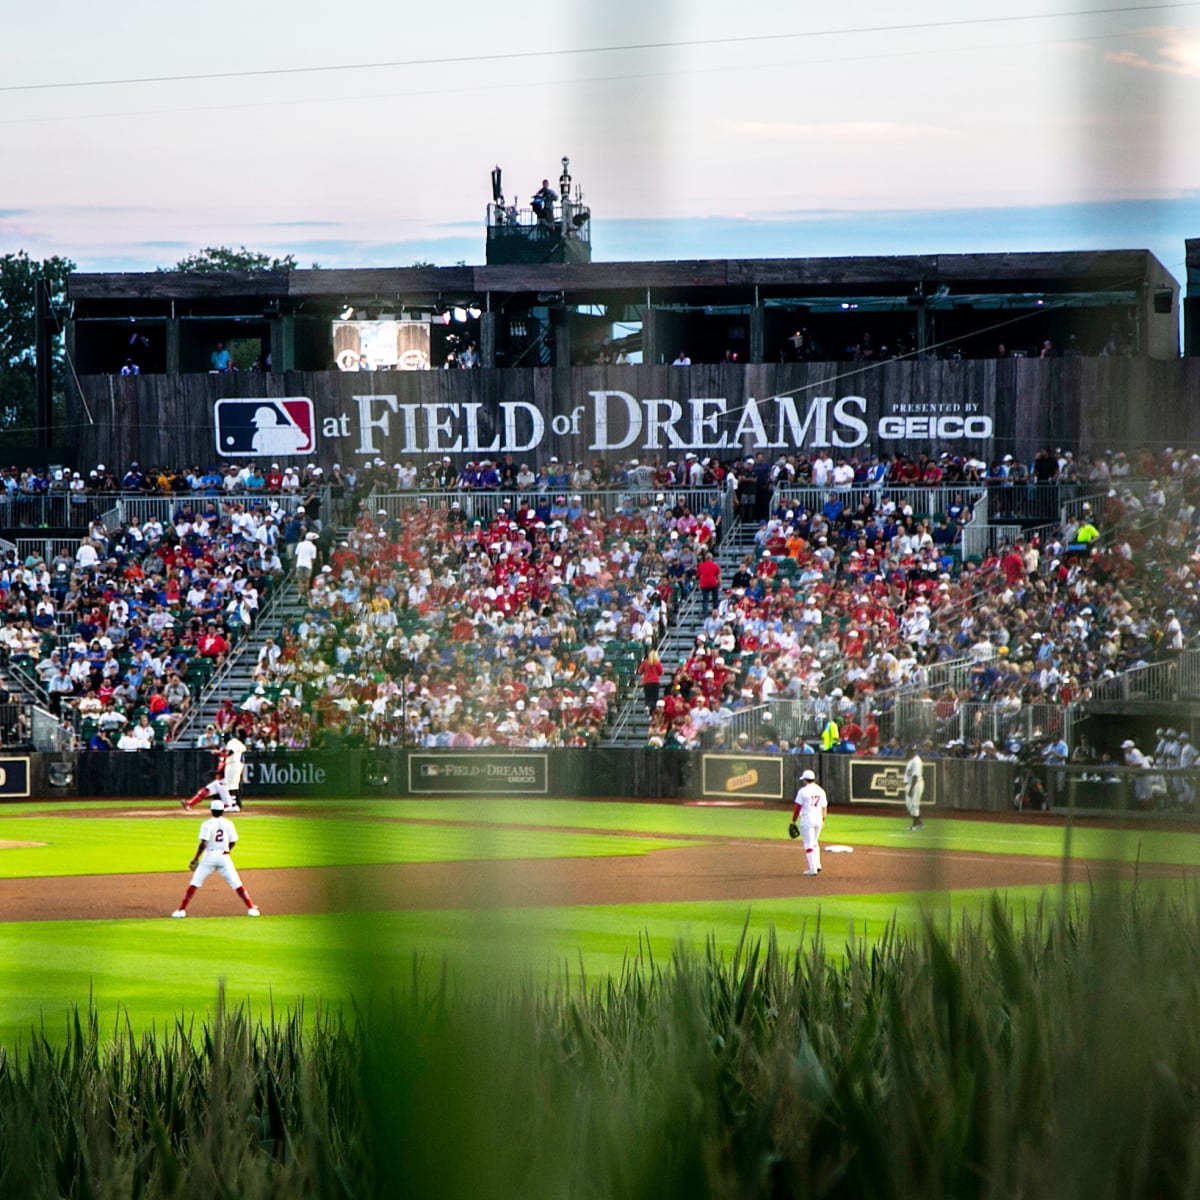 It's Cubs vs. Reds in 2022 Field of Dreams game